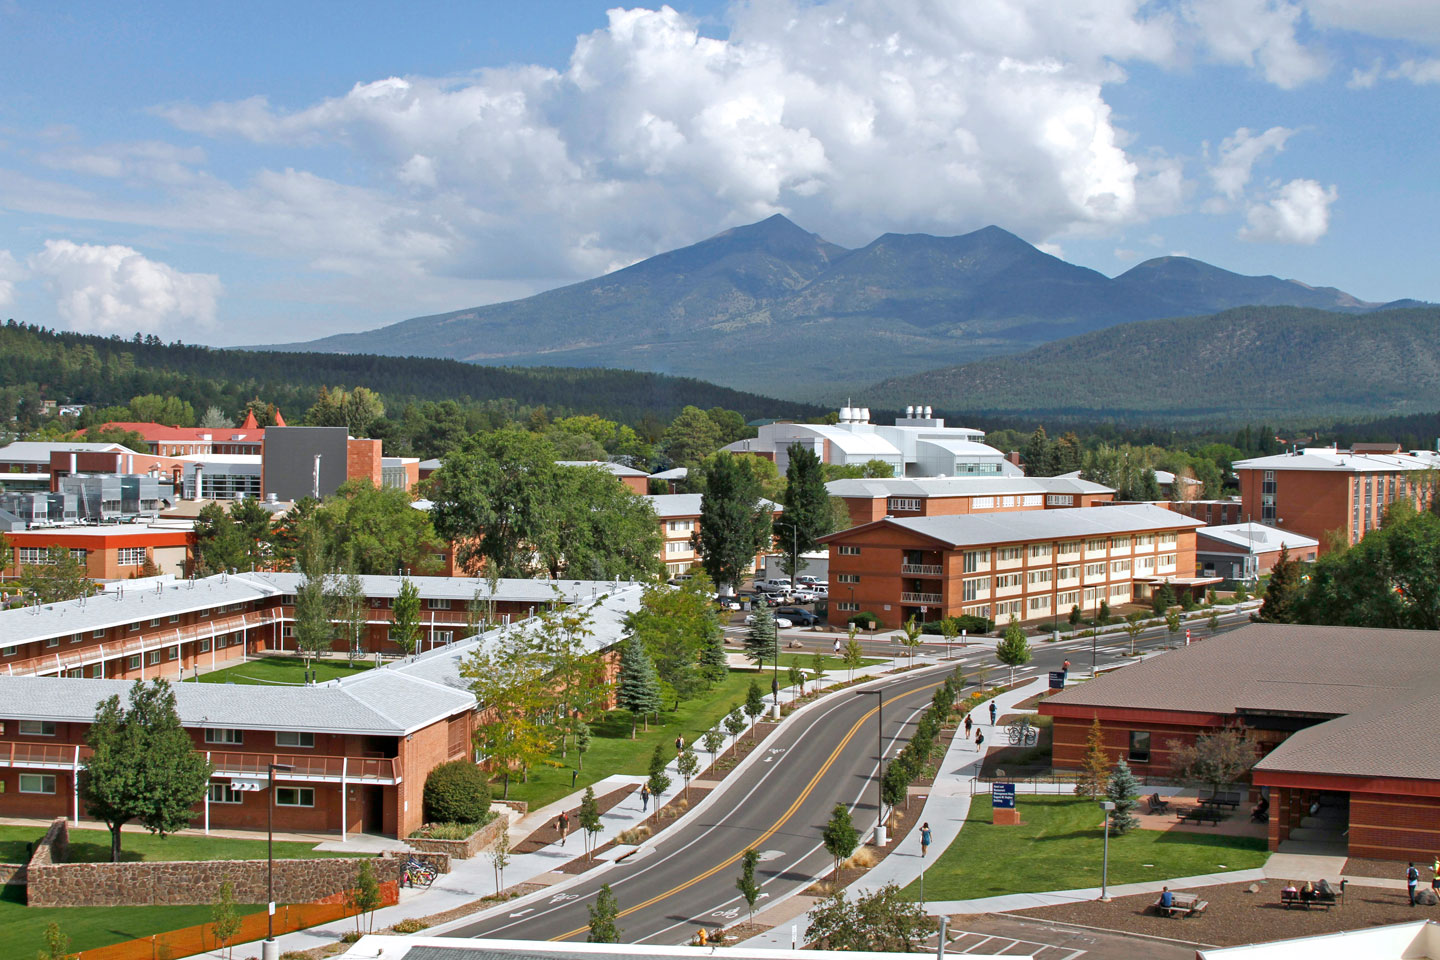 Northern Arizona University campus in the summer showing buildings in the foreground and the Peaks in the background